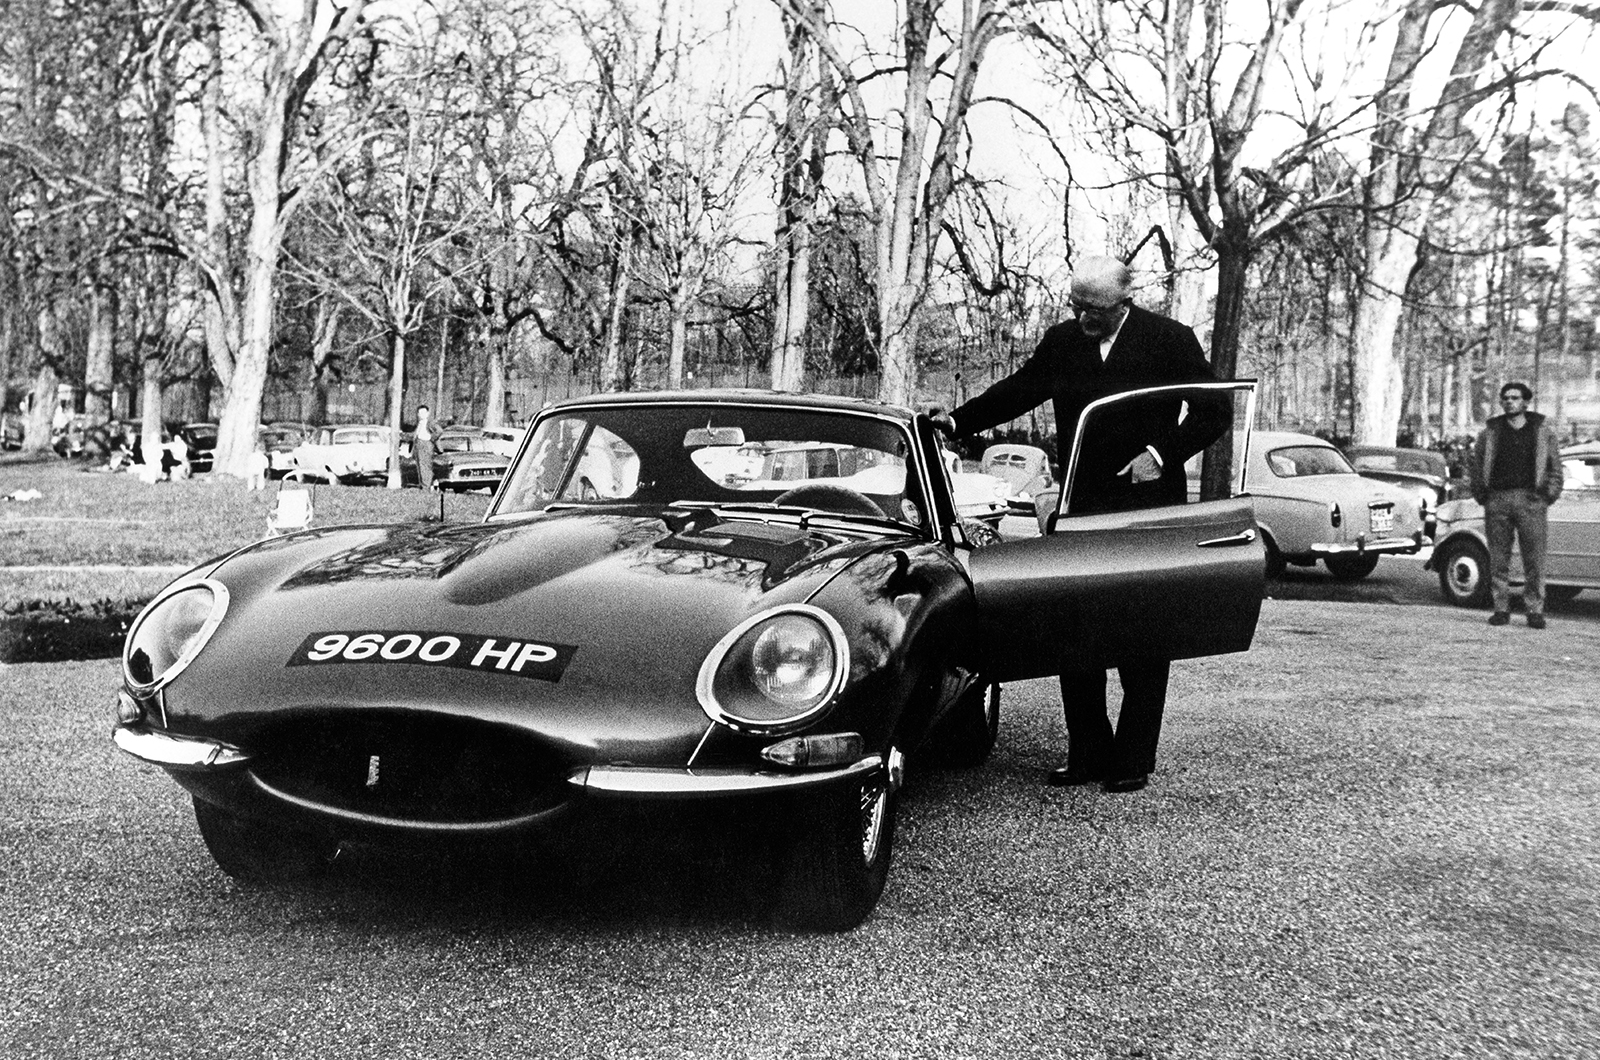 Classic & Sports Car – Famous Jaguar E-type duo reborn for 60th birthday